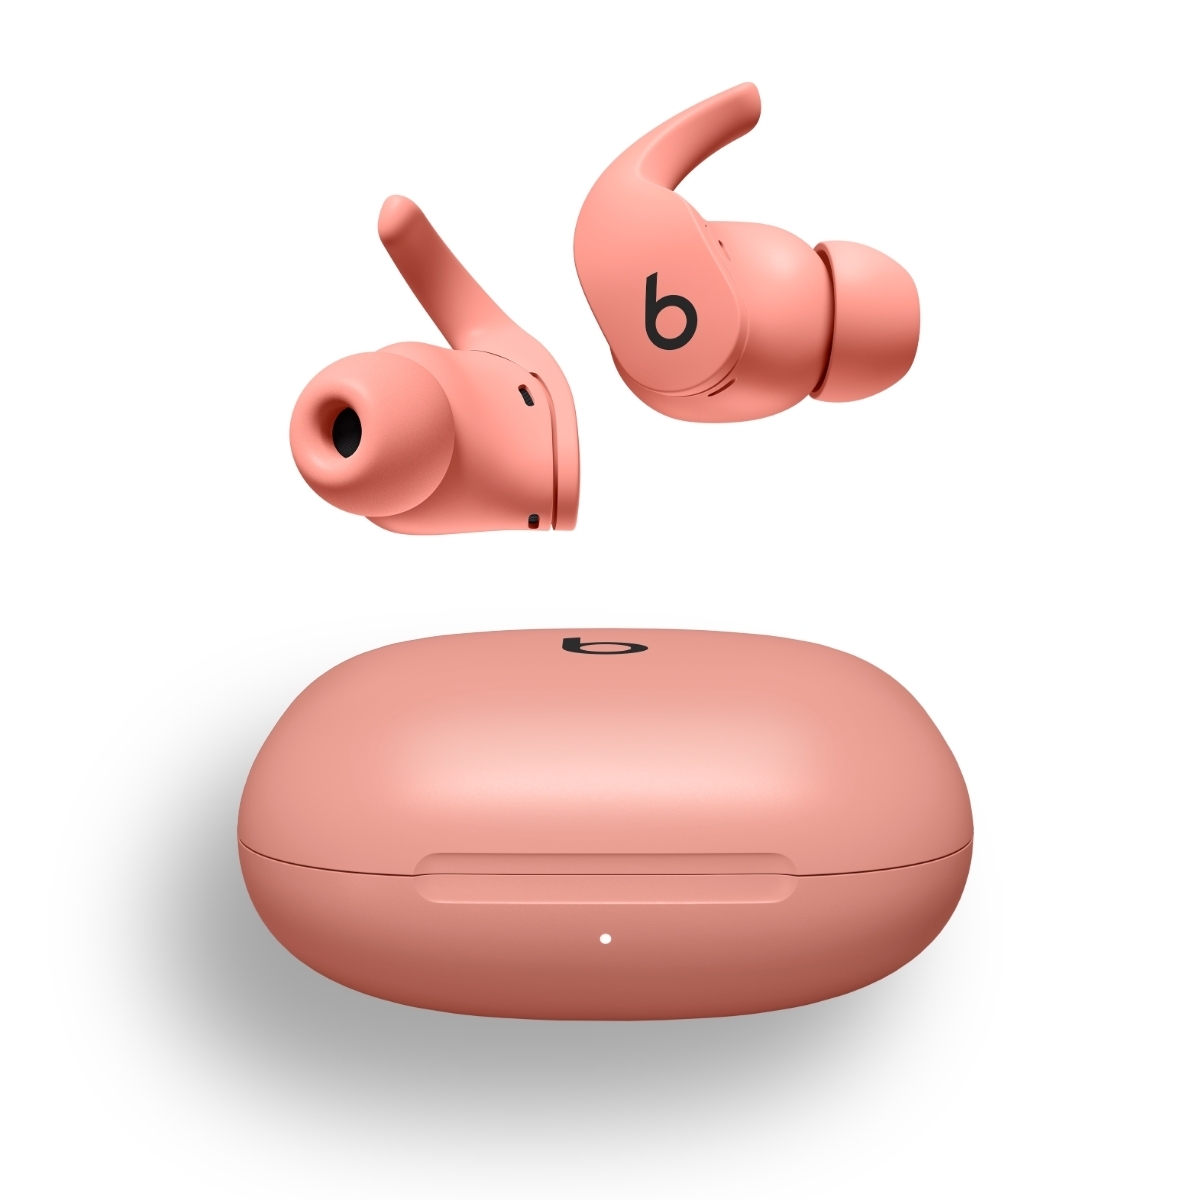 Apple Launches Beats Fit Pro in New Tidal Blue, Coral Pink, Volt Yellow Colors